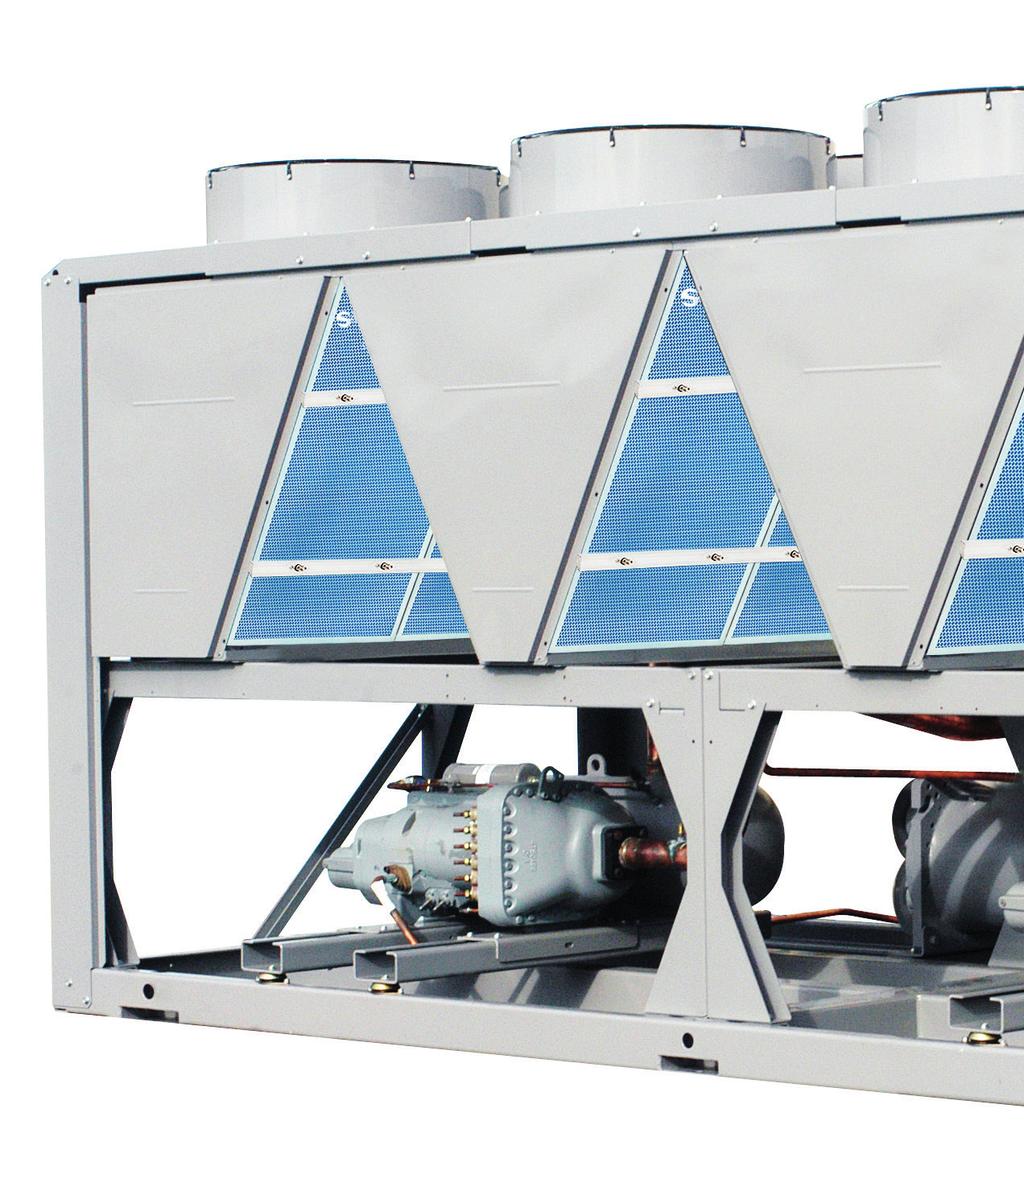 SMART COOLING COMPONENTS 1 CHILLER BOOSETER UNIT PRO 10 The high-pressure chiller booster unit pro 10 UV provides 70-140 bar pressure within the Smart Cooling system.